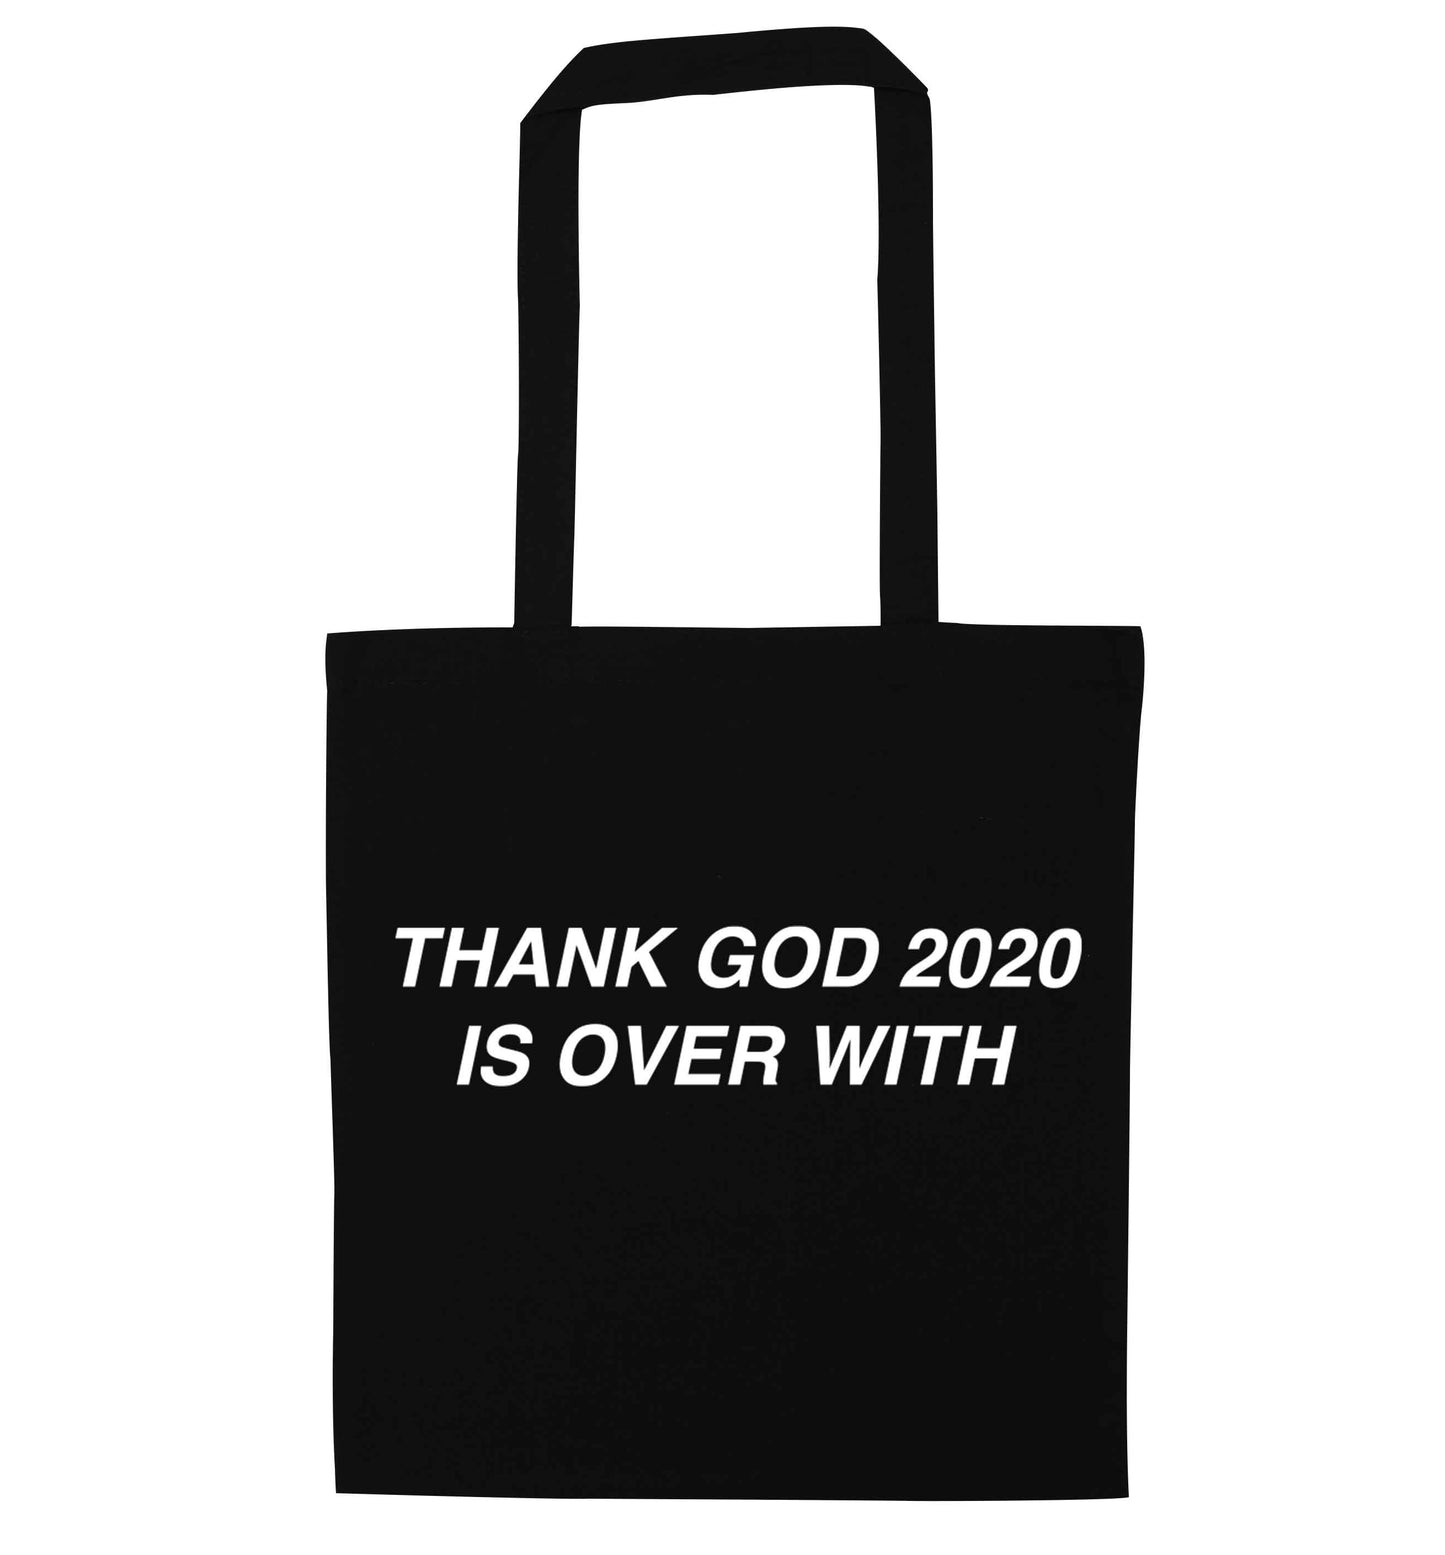 Thank god 2020 is over with black tote bag